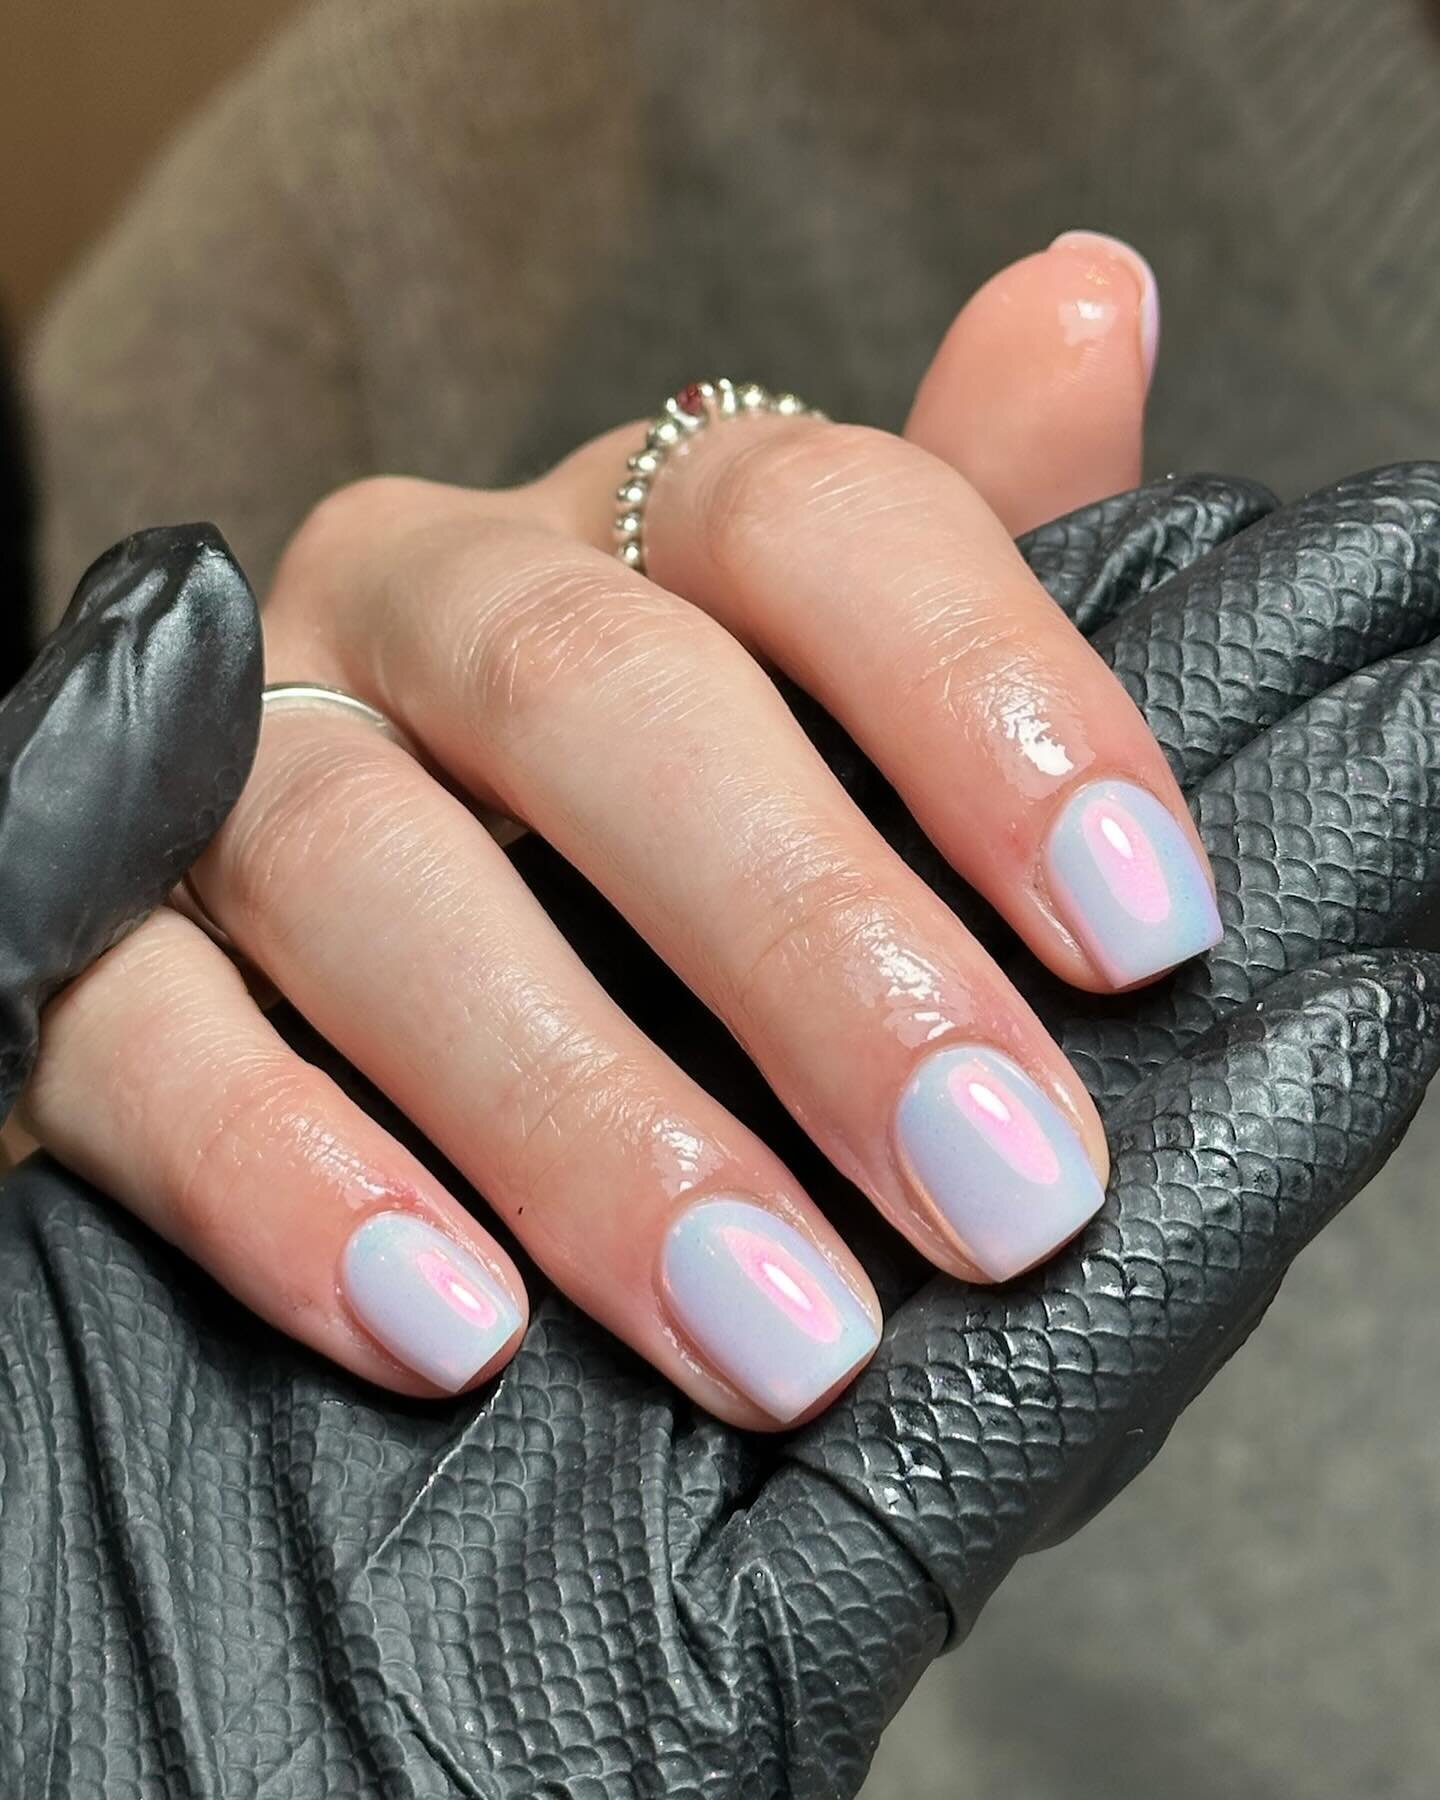 PRETTY PEARL 🐚

I think I have a new favourite chrome&hellip; 

Service:
BIAB Application with Basic nail art 

Products used:
&lsquo;Lady&rsquo; BIAB with &lsquo;Pearl&rsquo; Chrome @the_gelbottle_inc 

Prep:
Nail file @staleks_sharpening_uk 
Tools